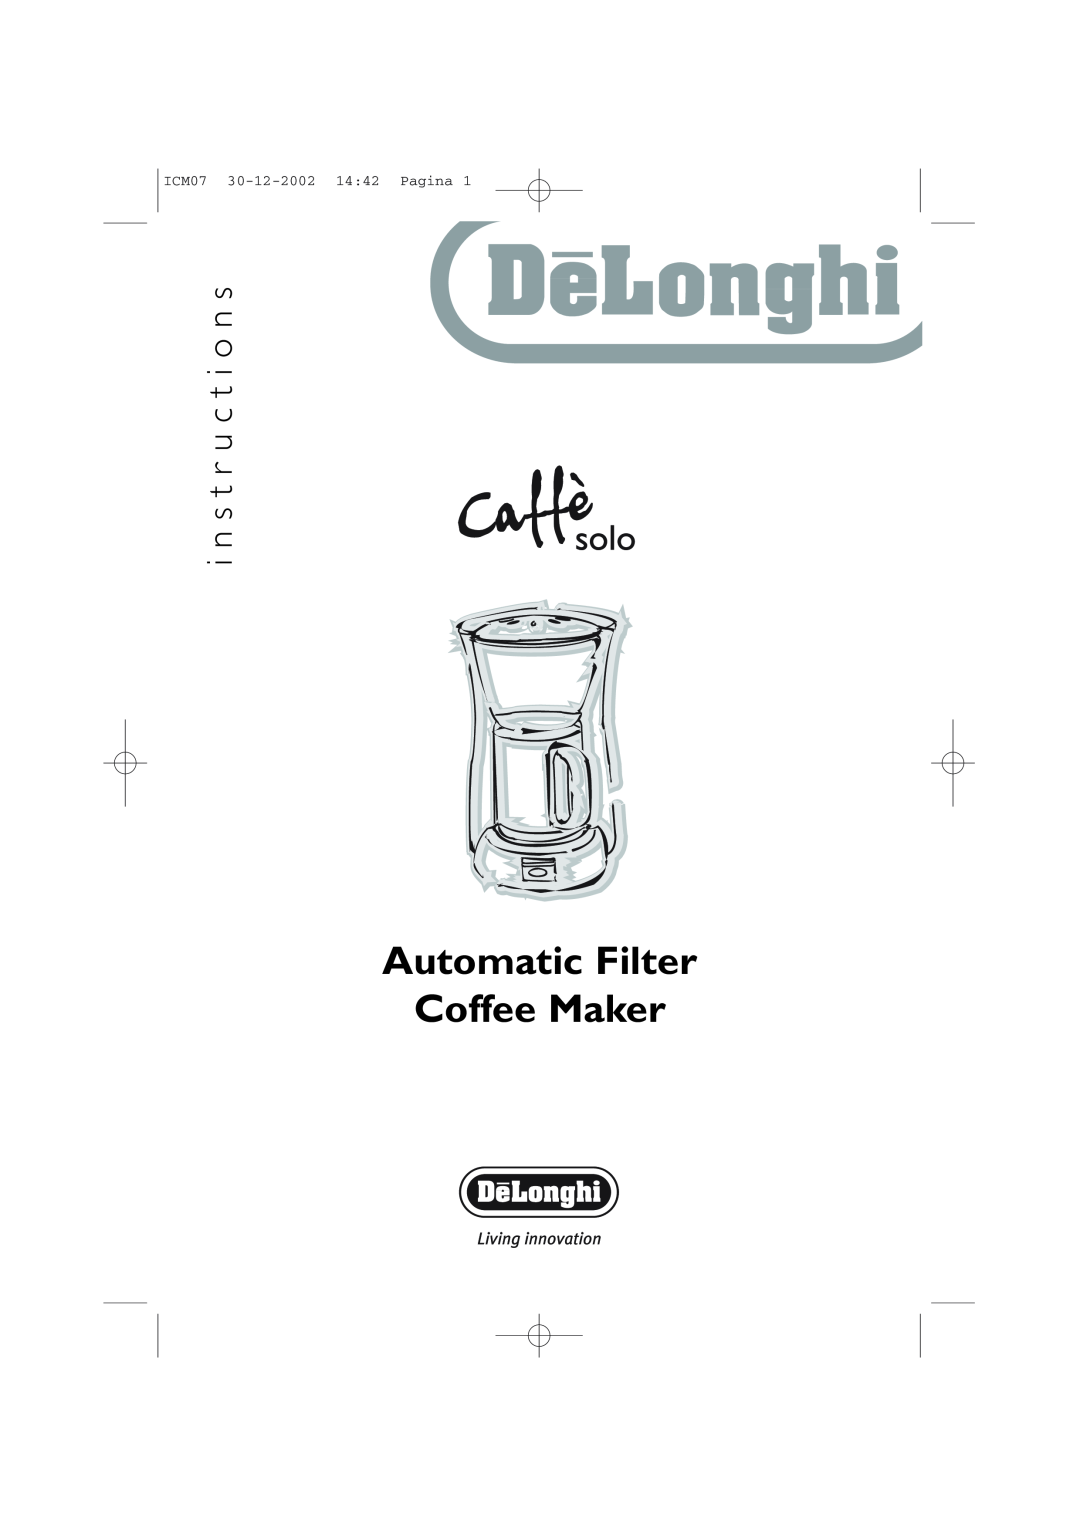 DeLonghi N/A manual Automatic Filter Coffee Maker, i n s t r u c t i o n s, ICM07 30-12-2002 1442 Pagina 